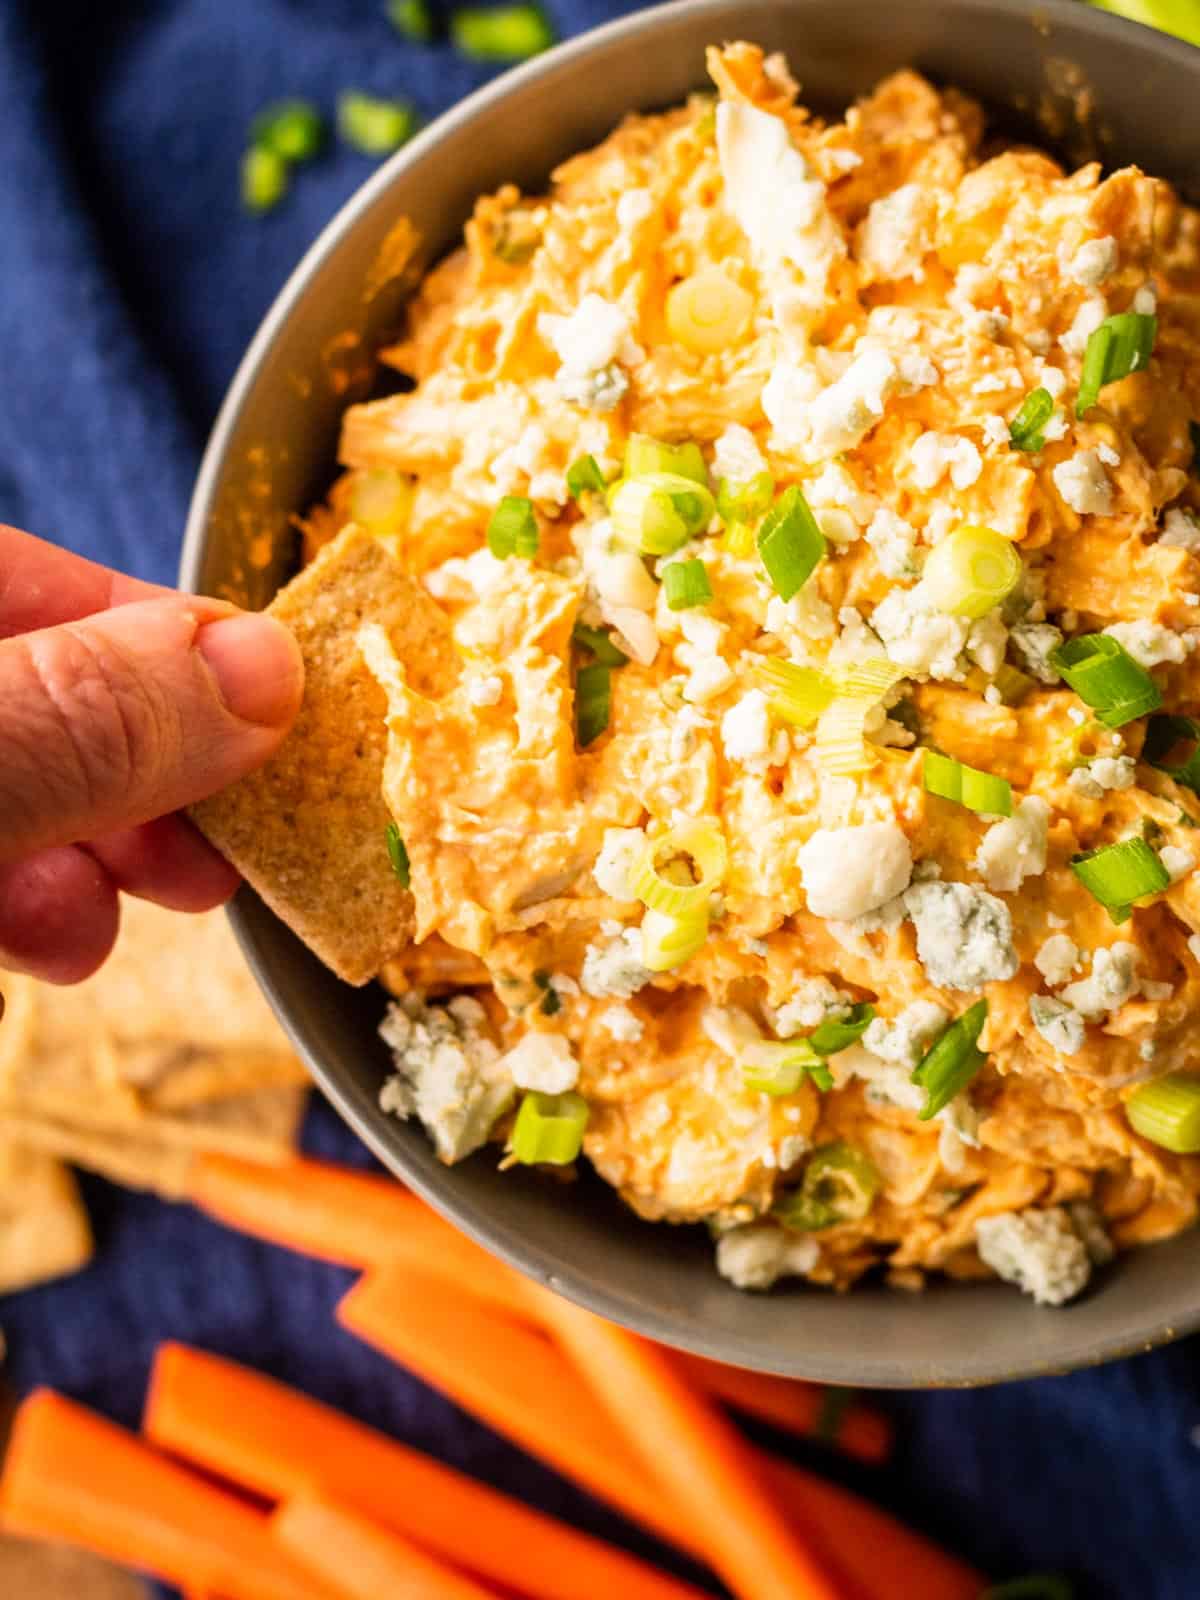 hand dipping cracker into buffalo chicken dip topped with blue cheese and green onions.